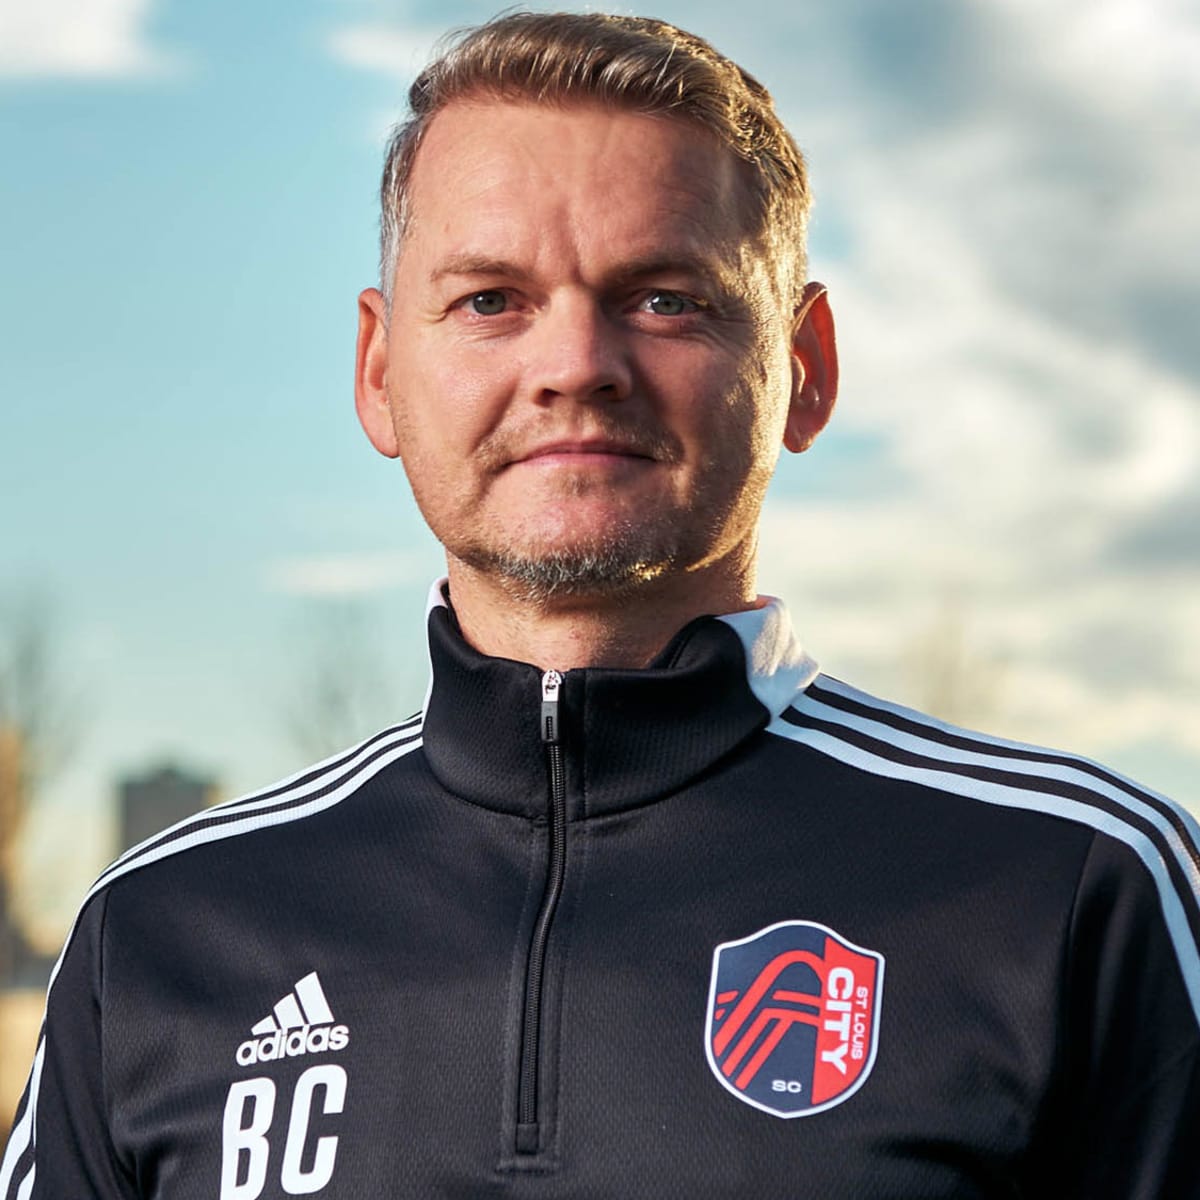 Bradley Carnell: How St Louis City SC landed on its first coach